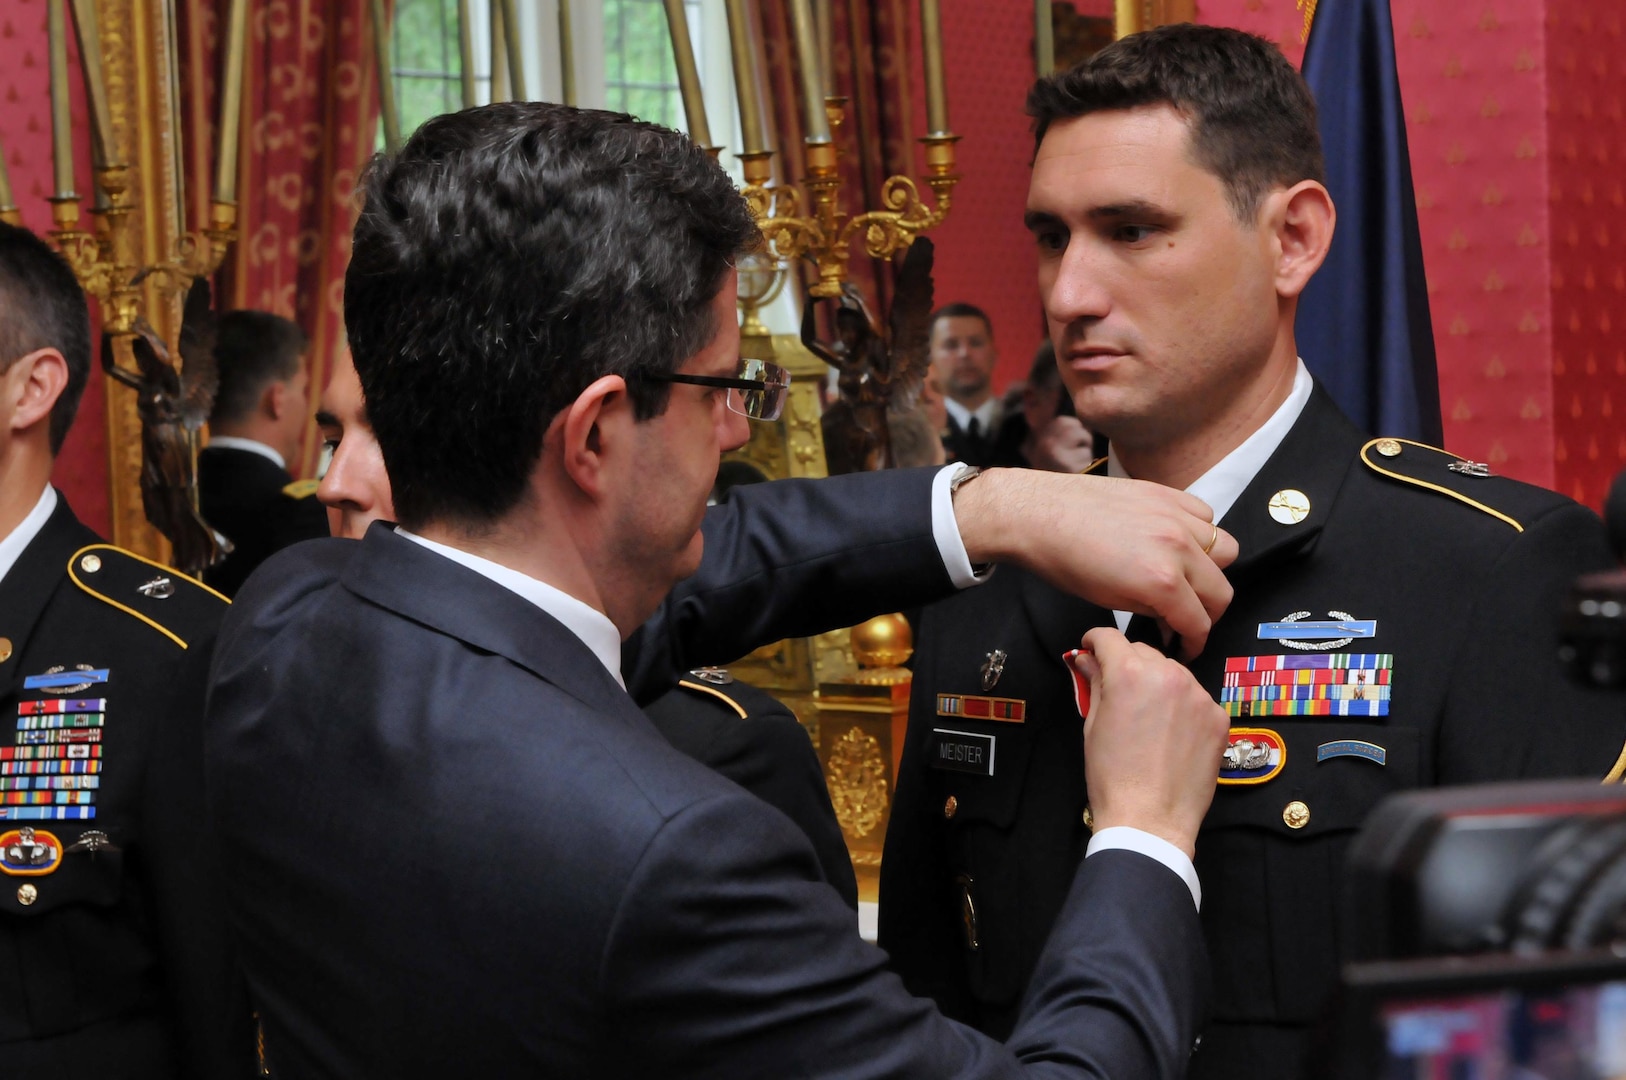 French Ambassador Francois Delattre awards the Croix de la Valeur Militaire, roughly analagous to the Silver Star, to Army National Guard Sgt. Ryan Meister during a private ceremony at the French Ambassador's Residence in Washington, D.C., on July 25, 2011, awarding the honor to five National Guard and one active duty Special Forces Soldiers. (U.S. Army photo by Staff Sgt. Jim Greenhill) (Released)